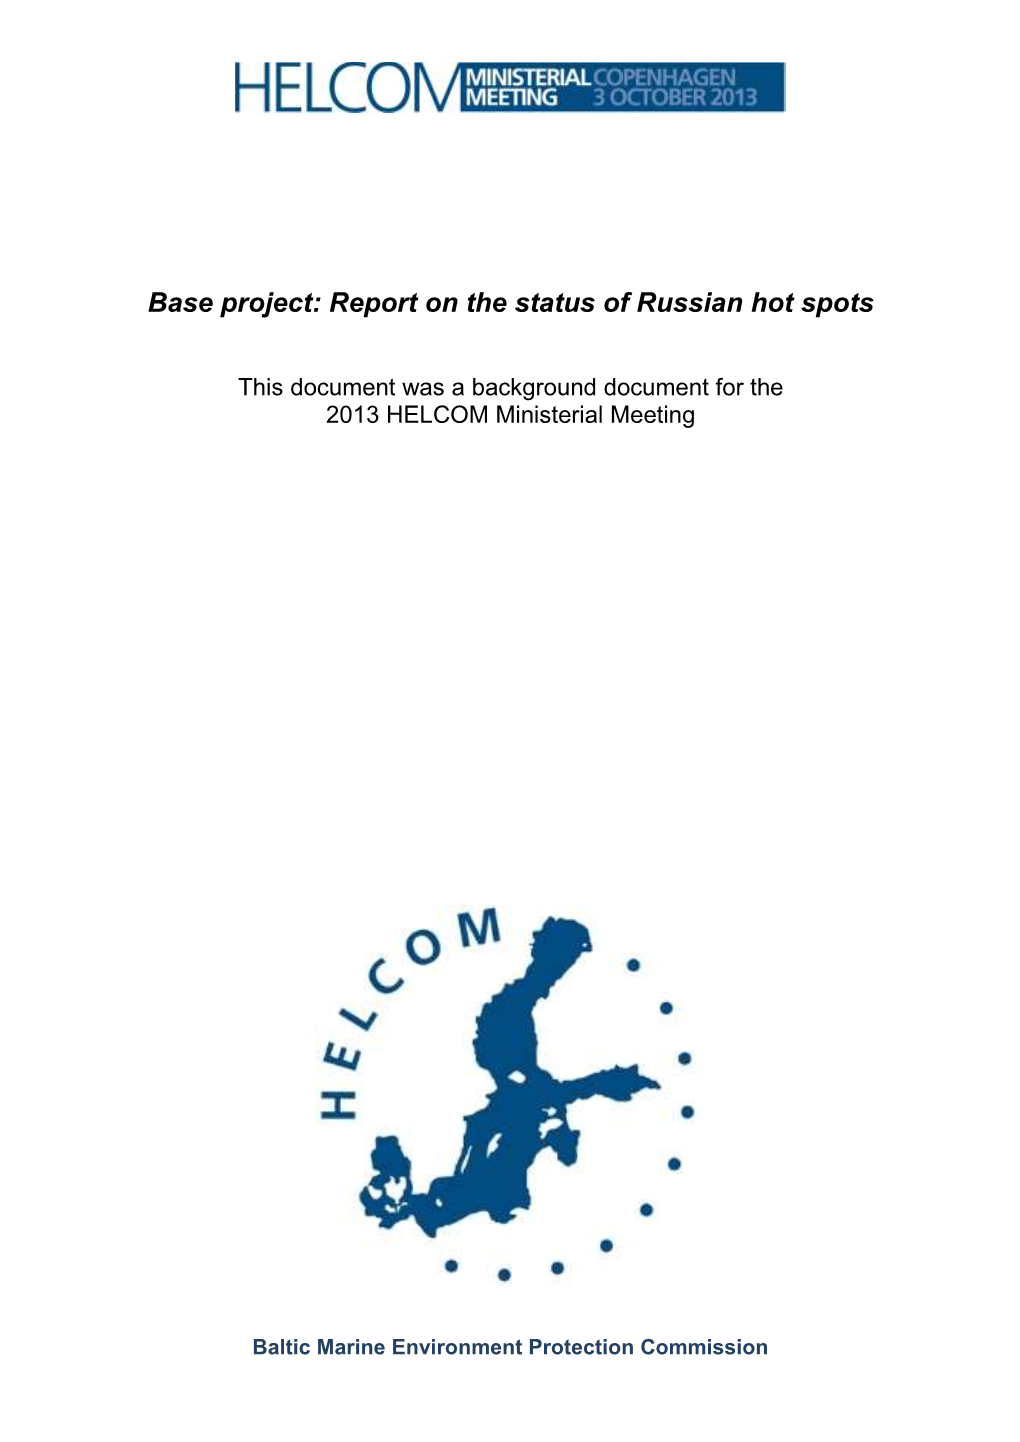 Base Project: Report on the Status of Russian Hot Spots